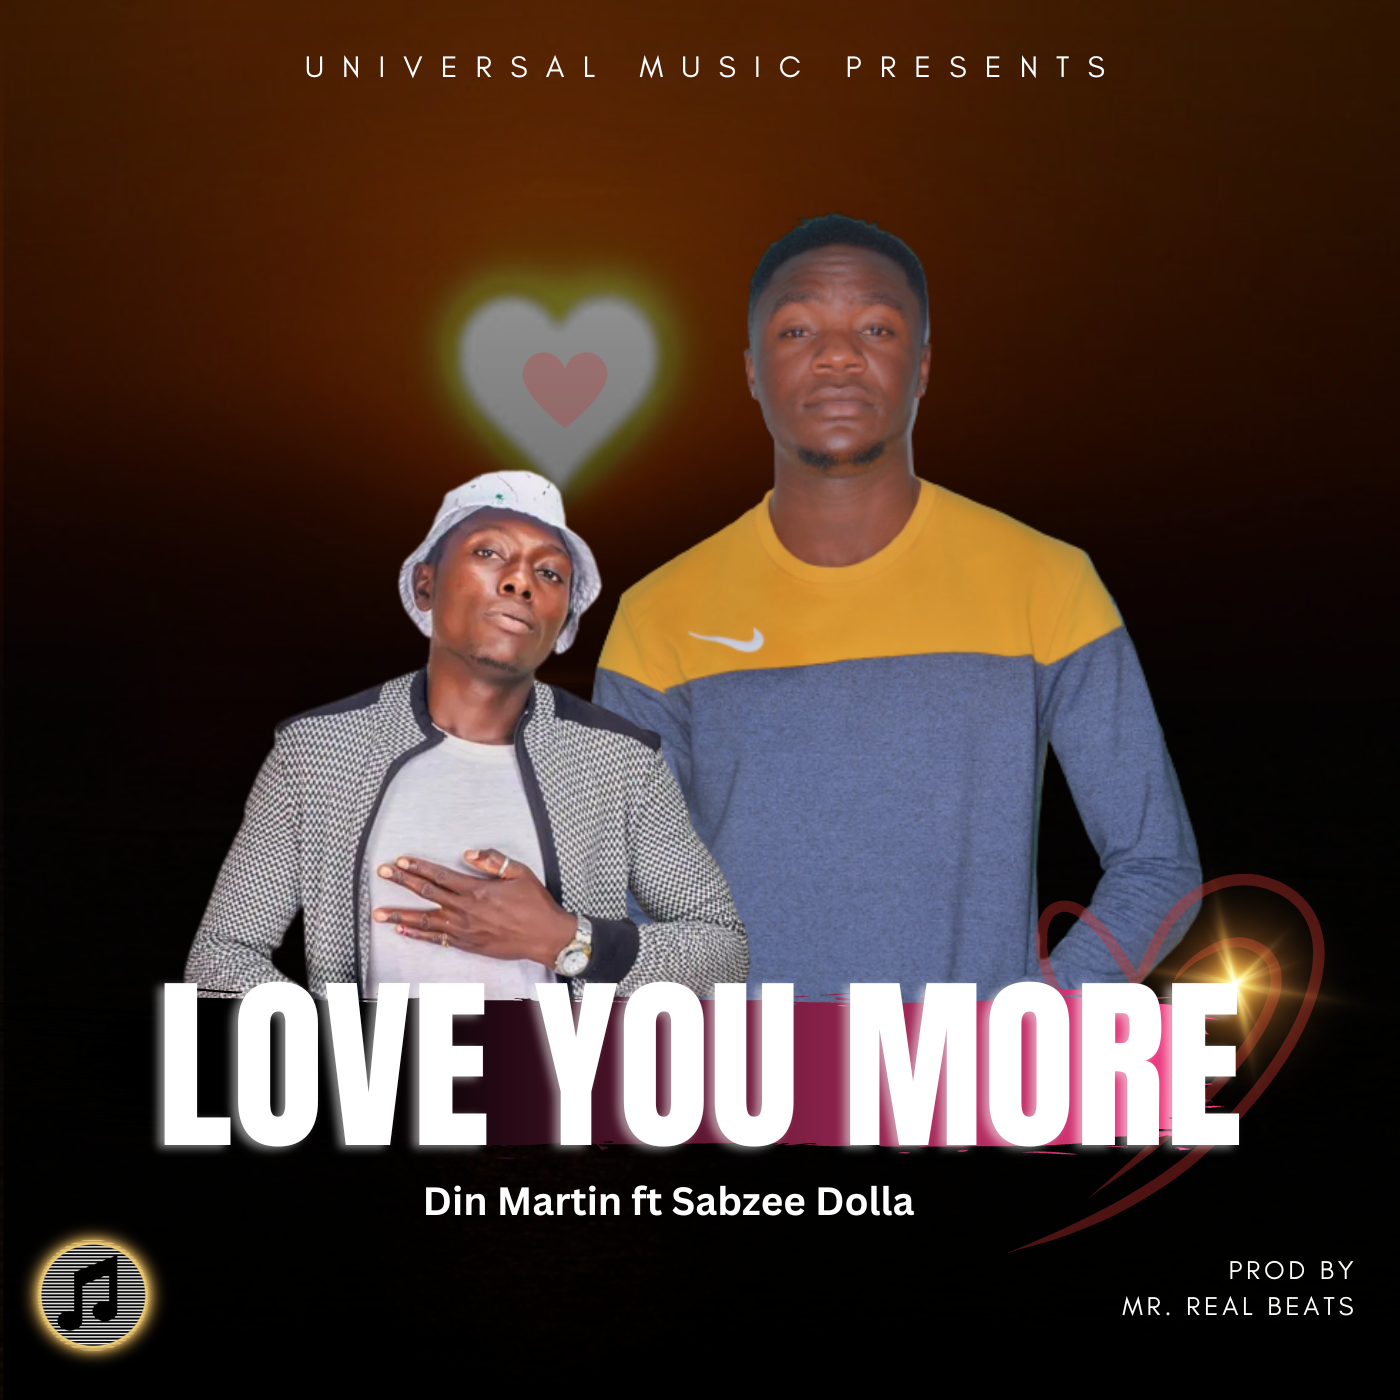 Din Martin Ft Sabzee Dolla - Love You More (Prod By Mr Real Beats)